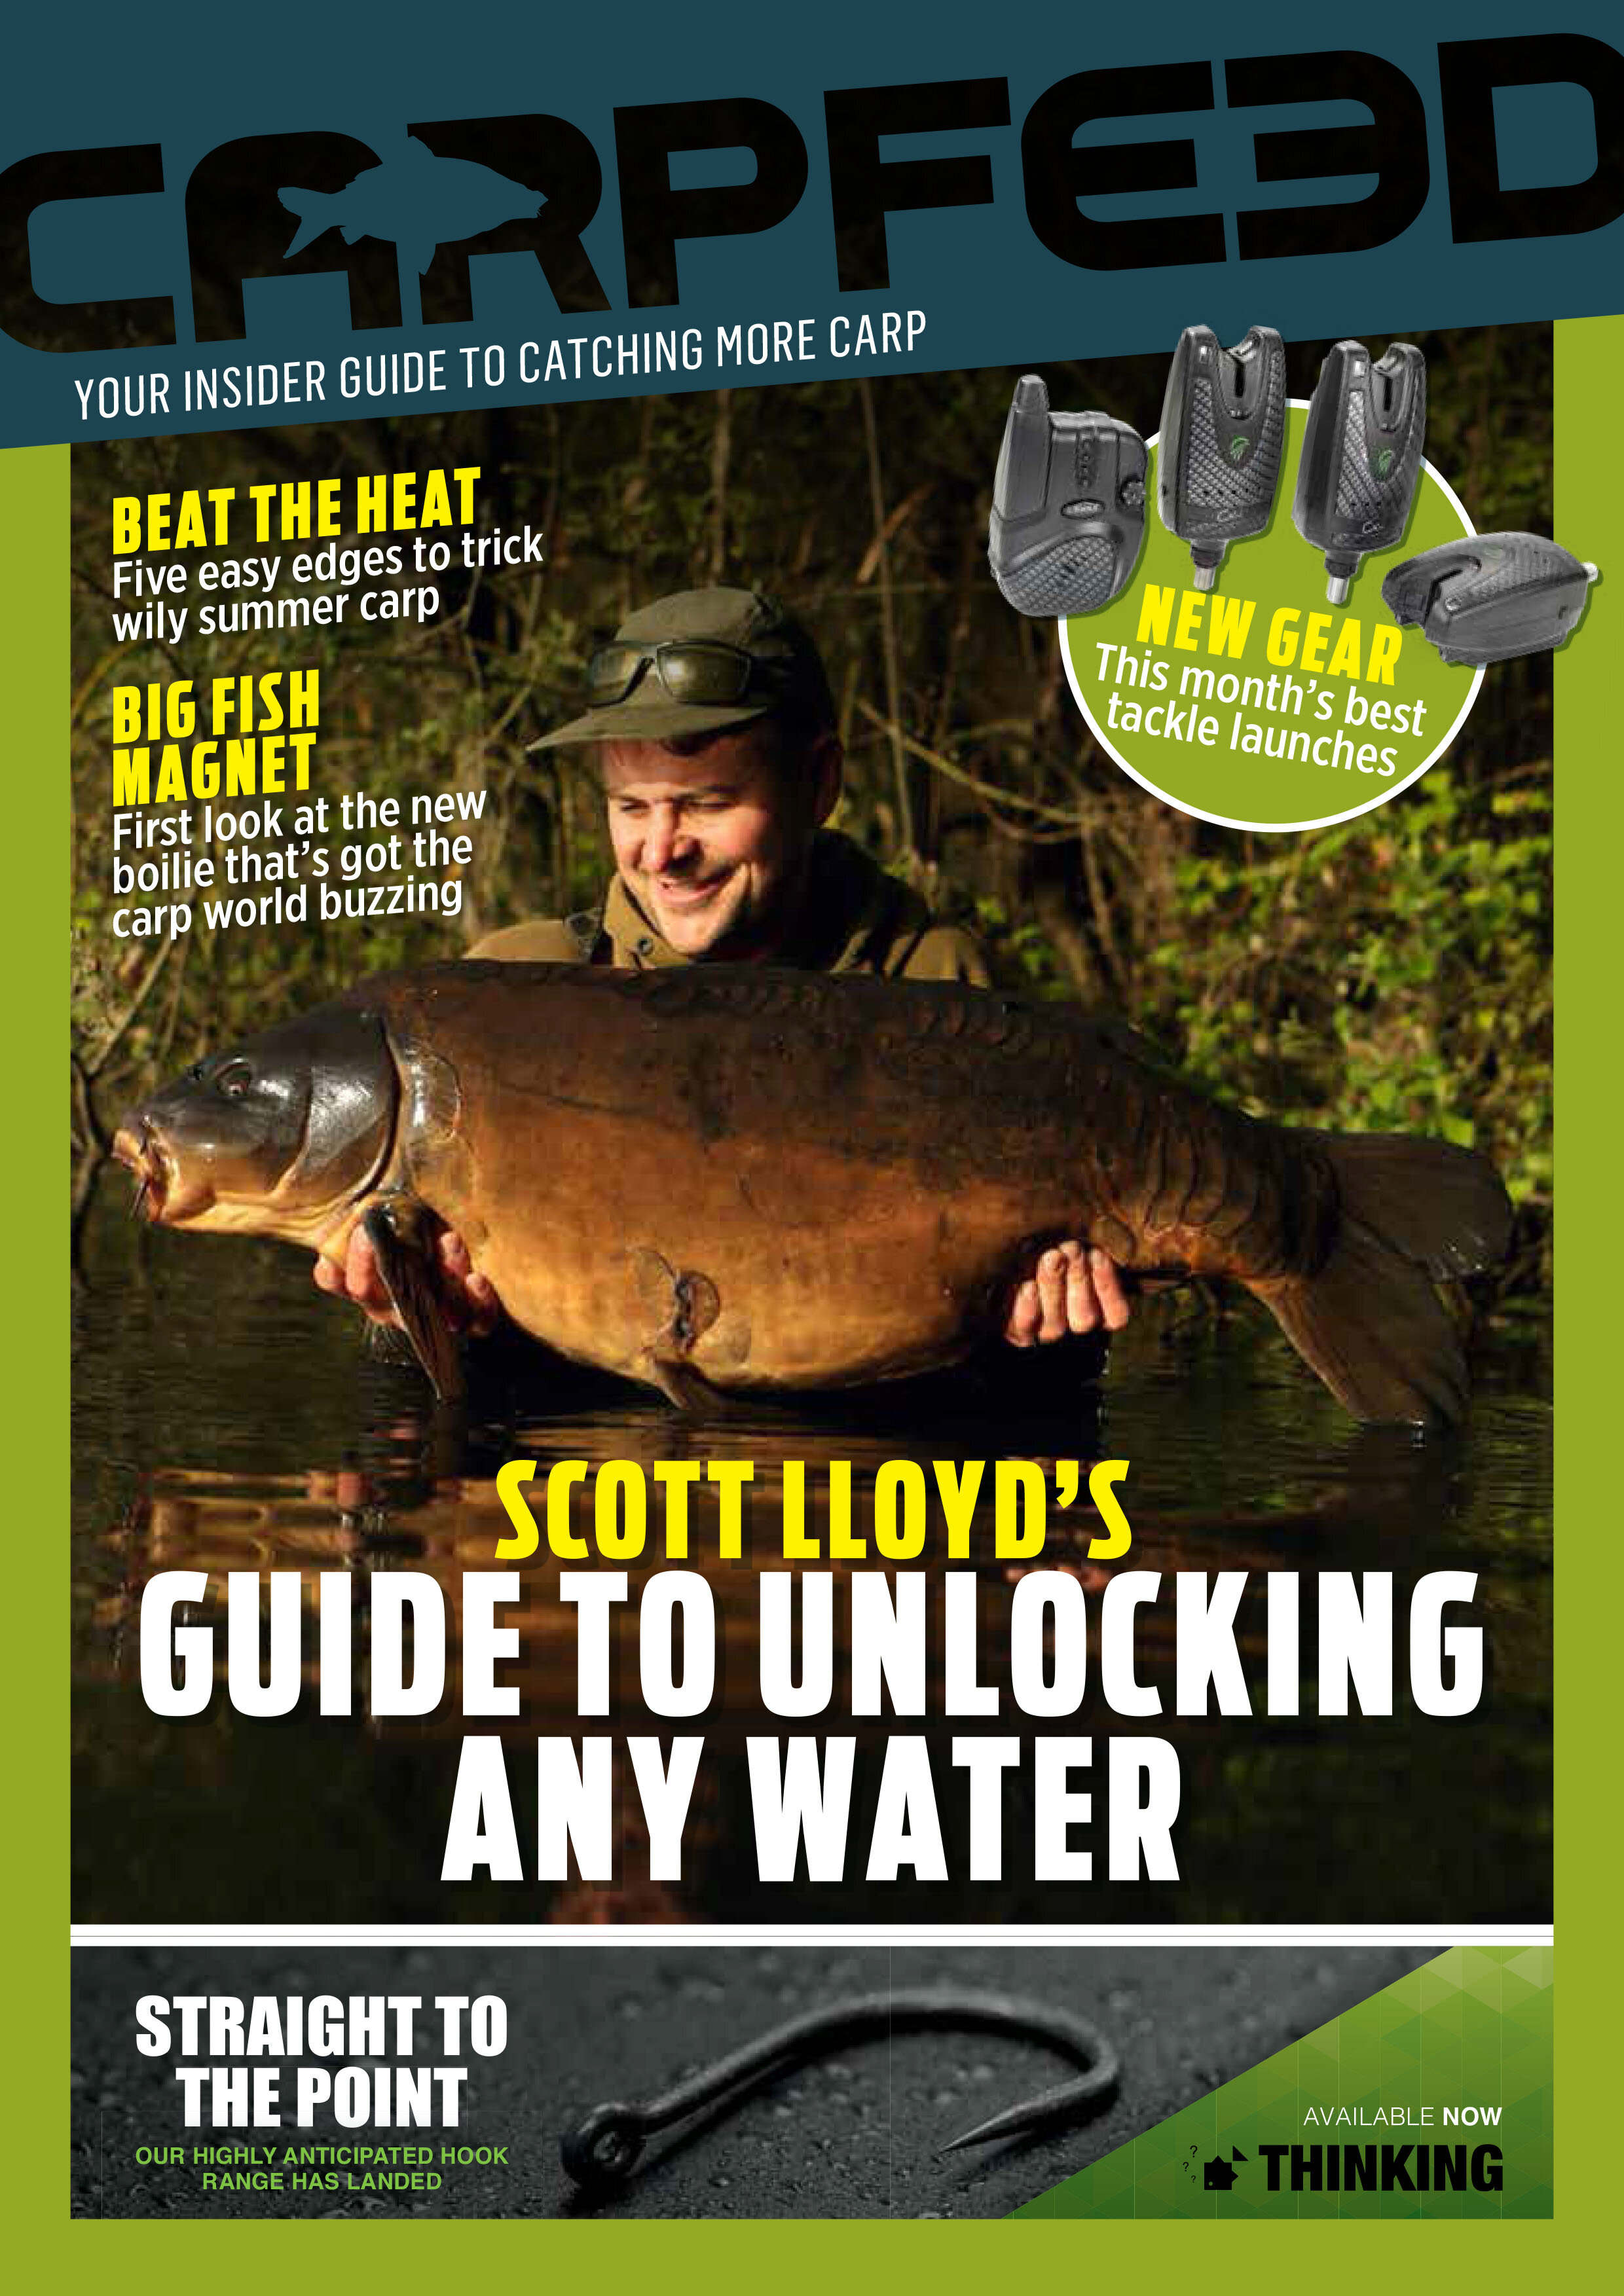 Angling Times June 2nd issue — Angling Times